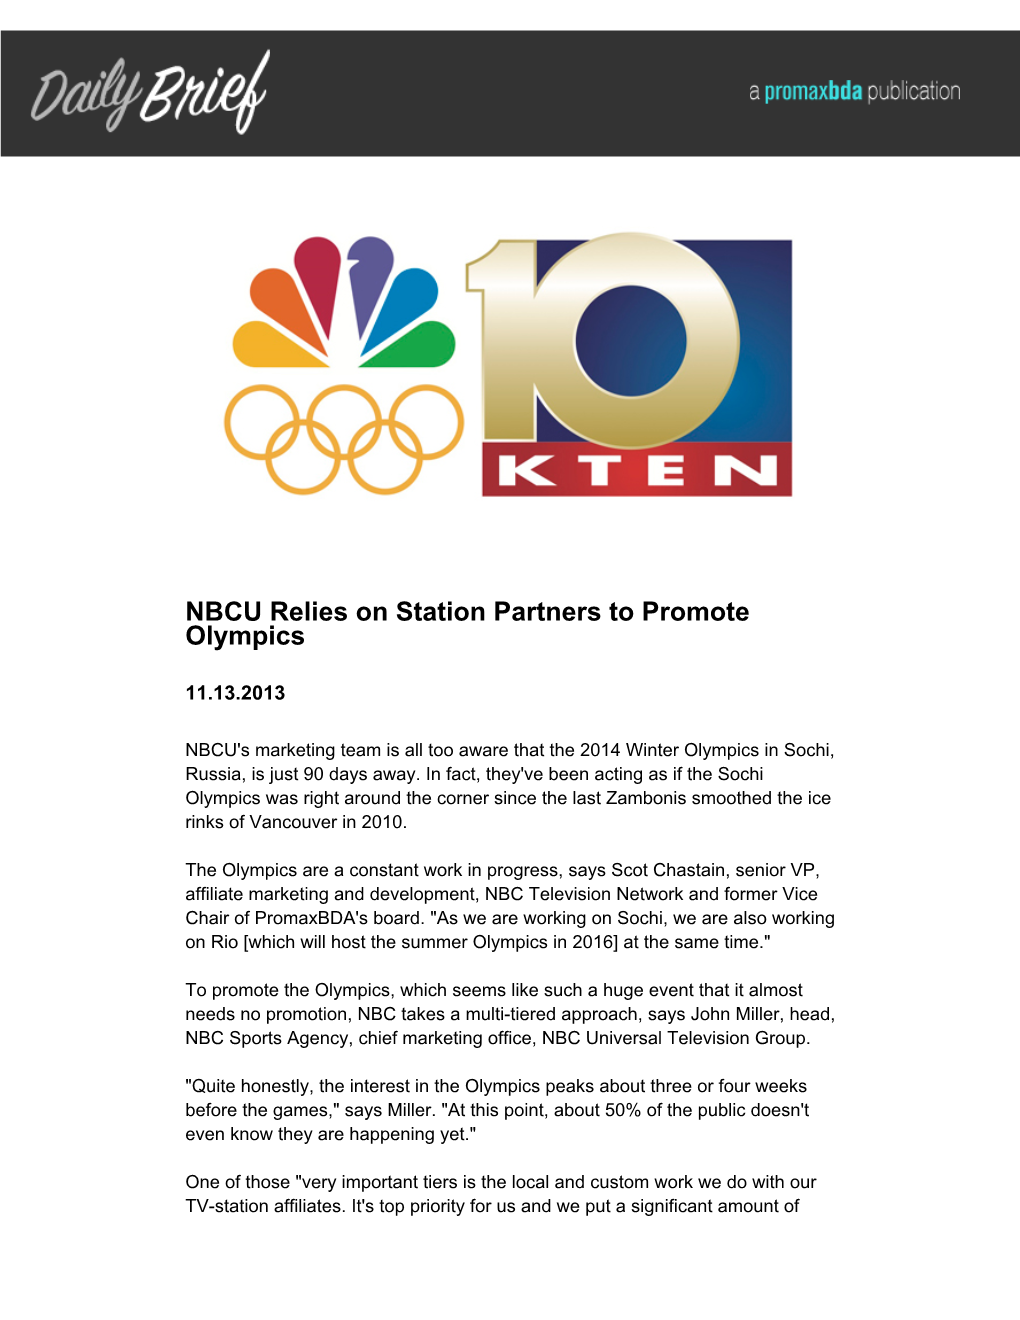 NBCU Relies on Station Partners to Promote Olympics